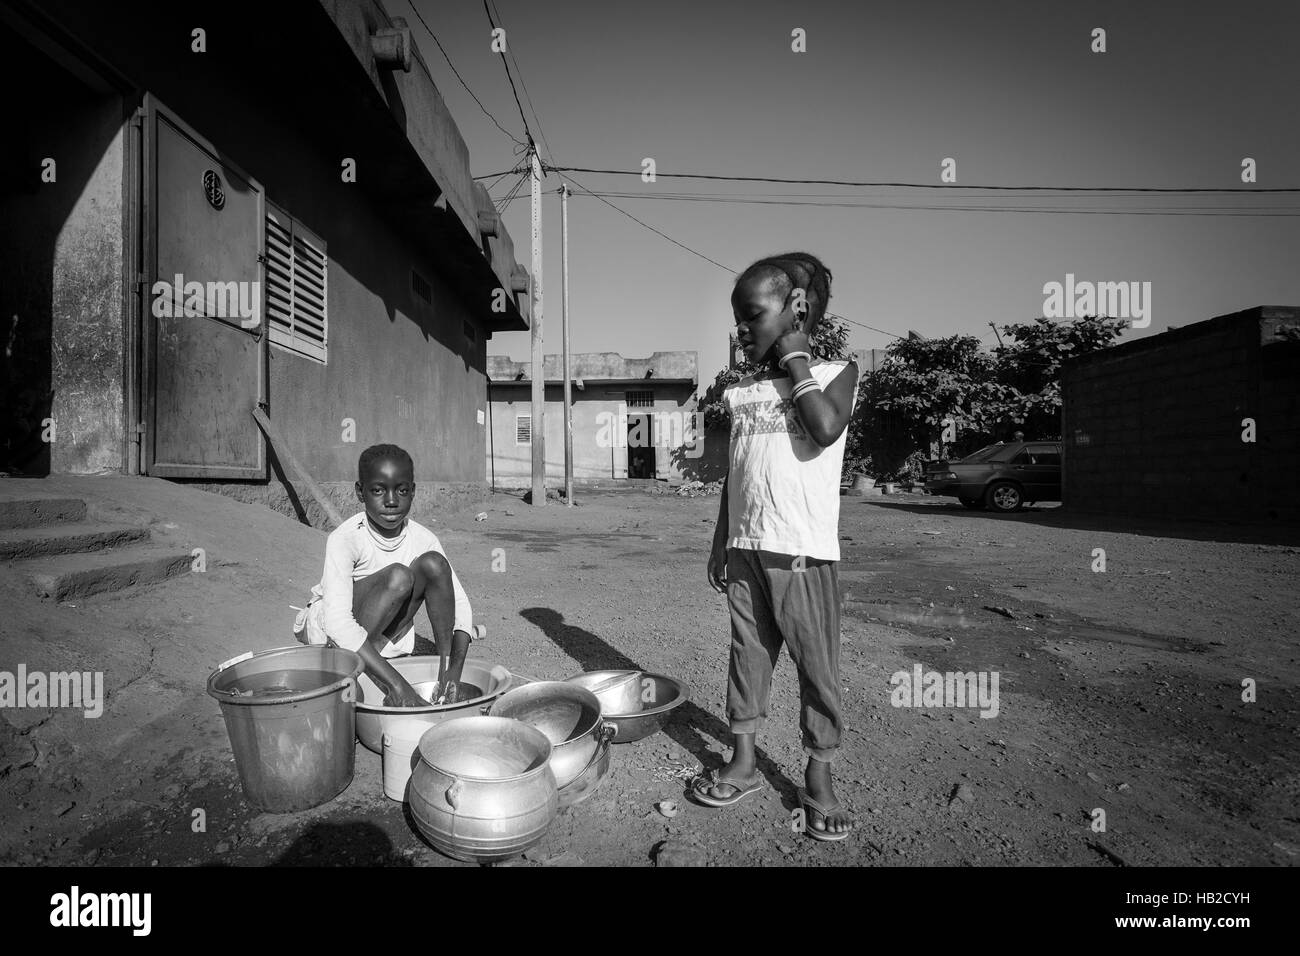 BAMAKO, MALI, DEC 23: Two African native young girls washing the dishes outside the house in the residential district of Bamako. Mali 2010. Black and  Stock Photo